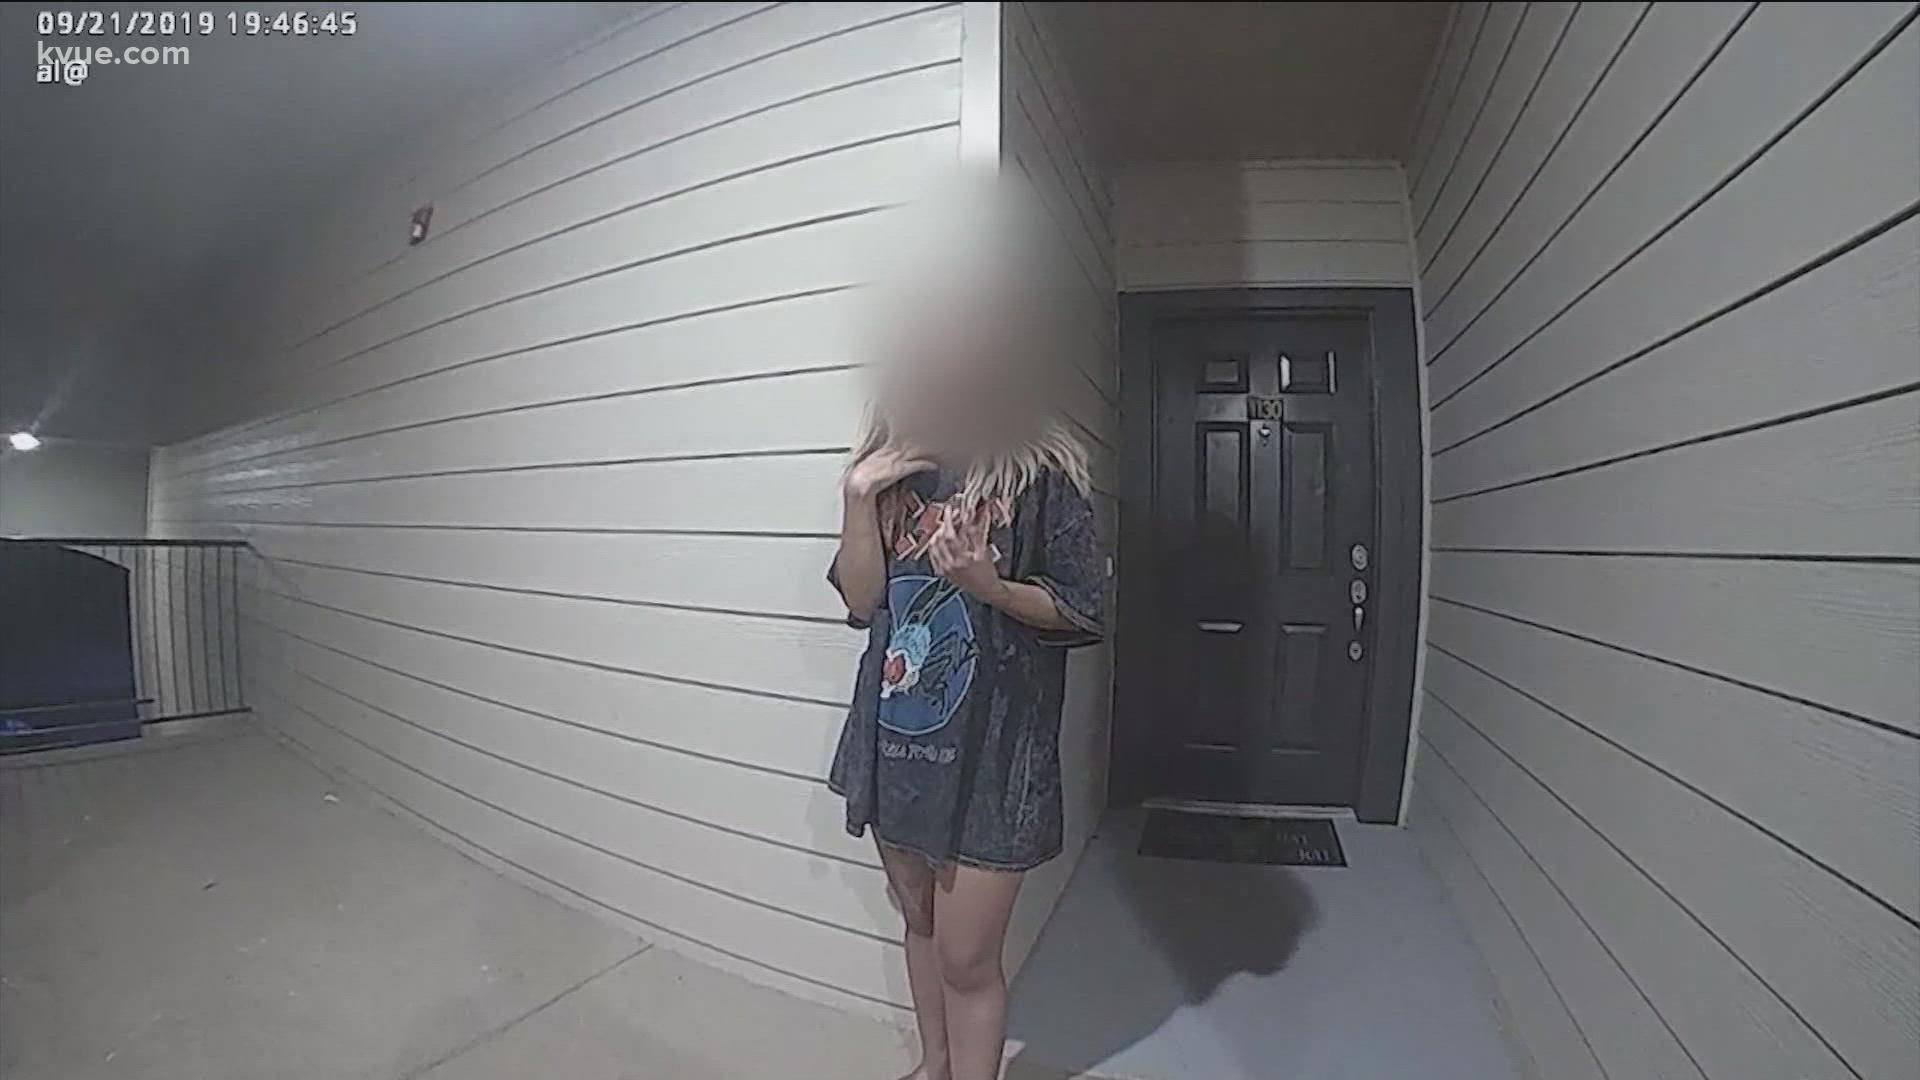 The unprovoked force in September 2019 came after the woman said she did not want deputies to search her suburban apartment for her boyfriend.